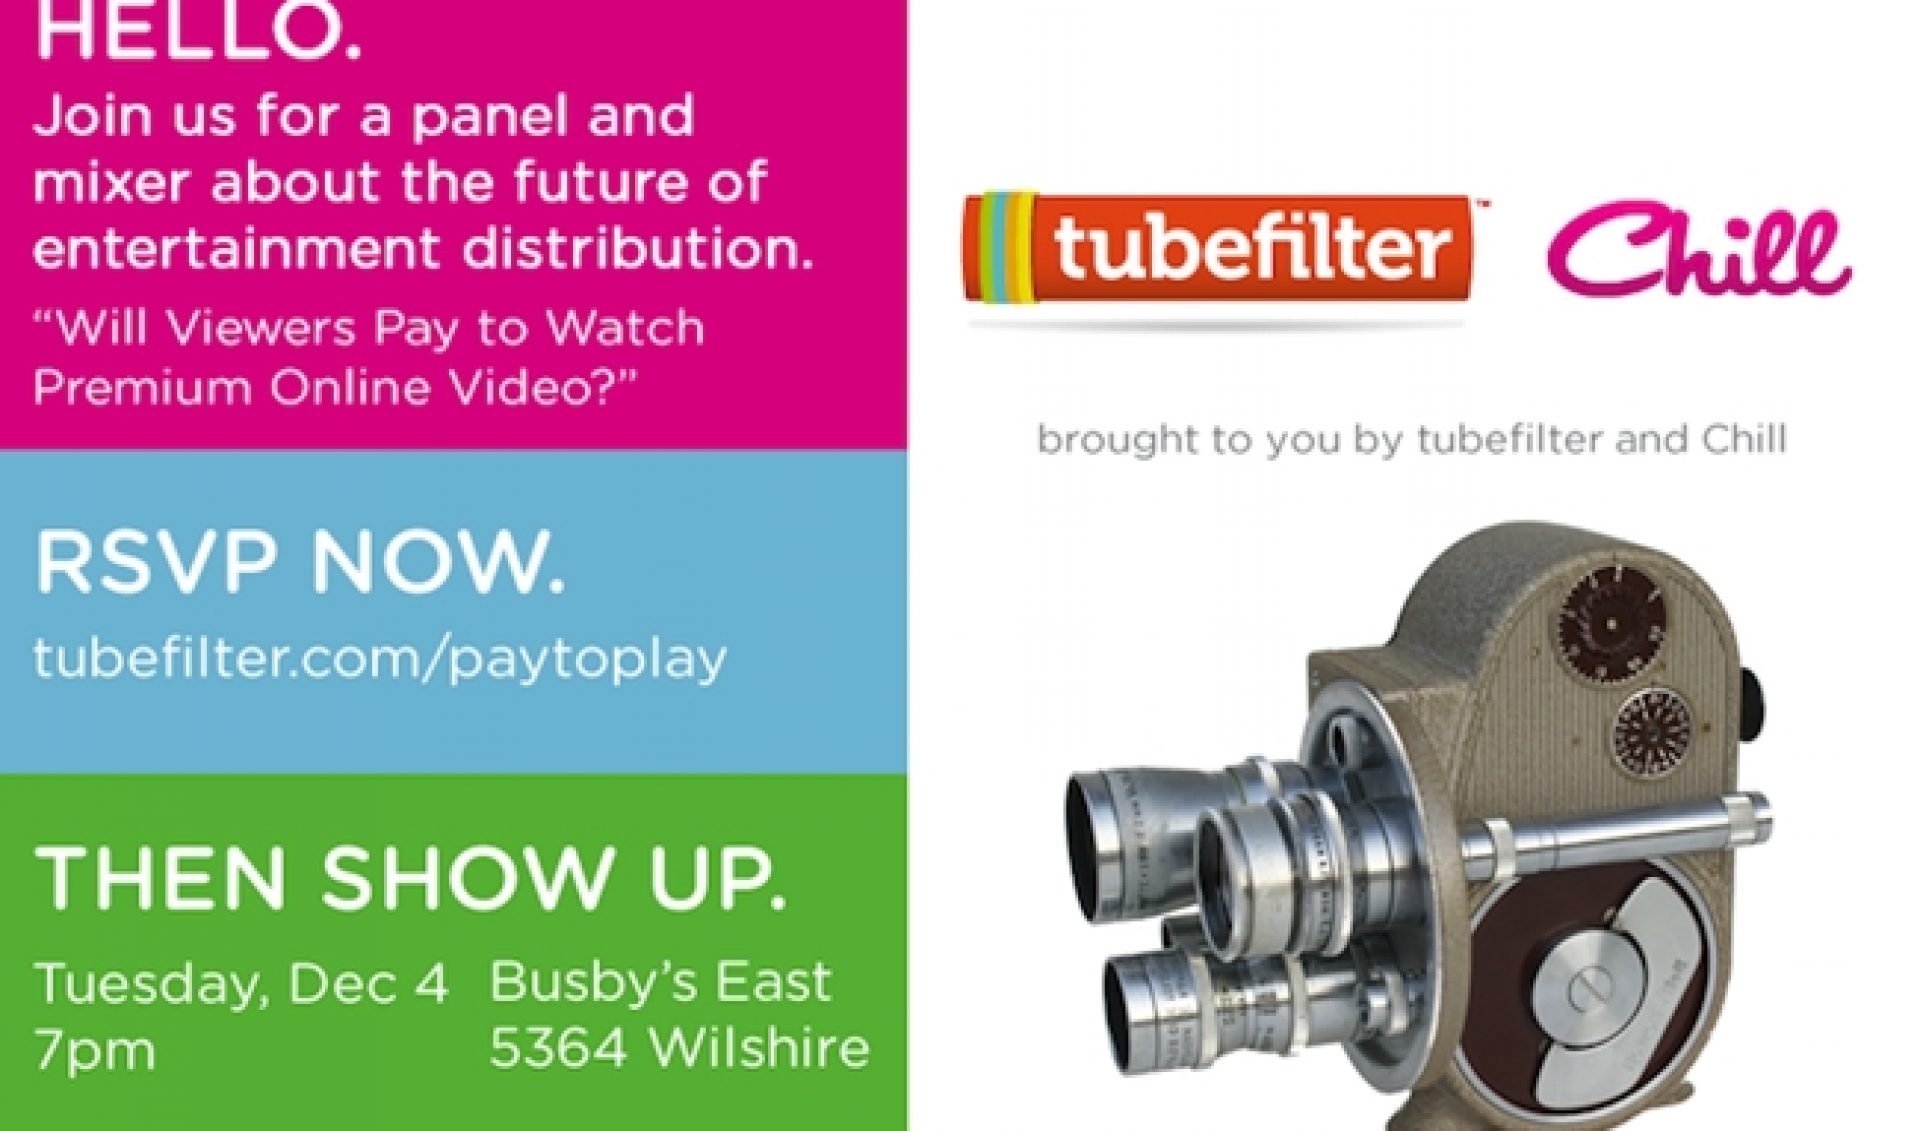 There’s Still Time To RSVP For Tonight’s Tubefilter Meetup